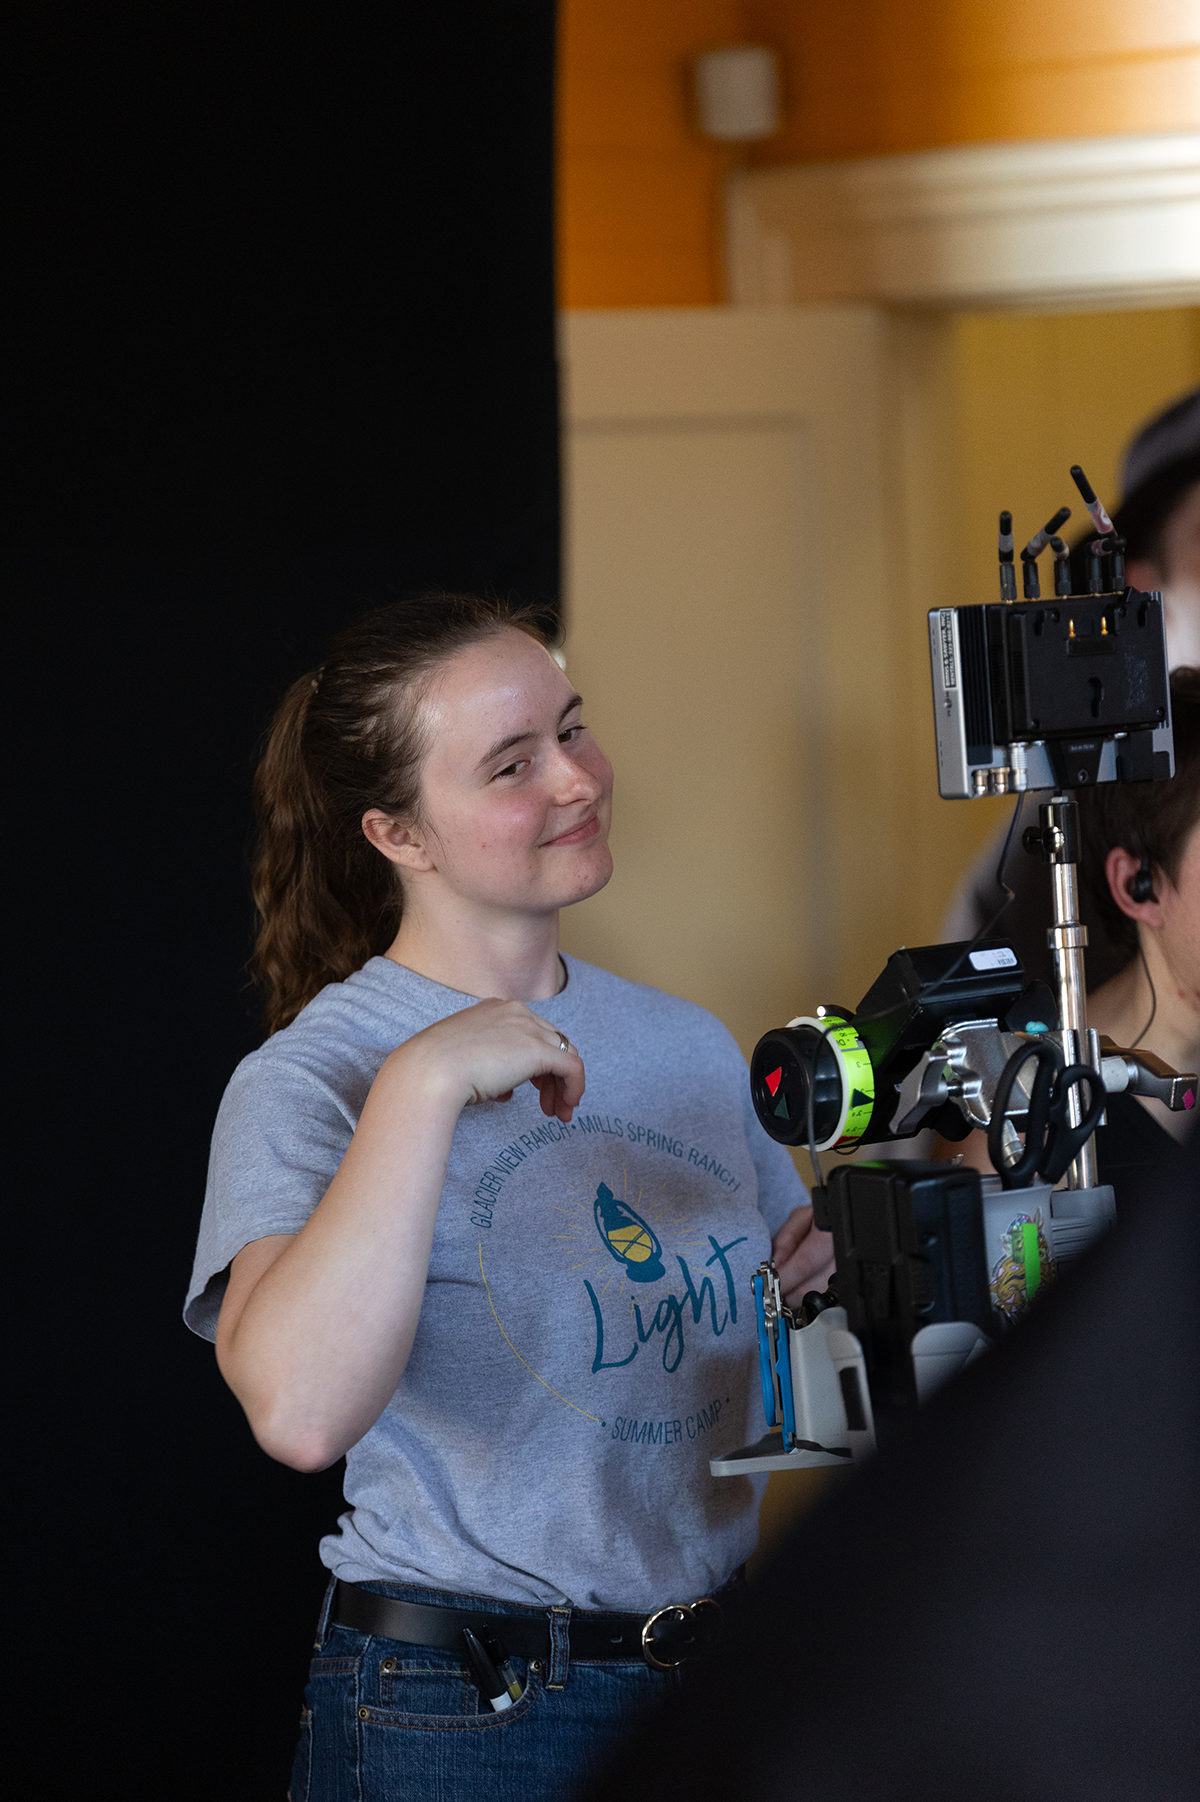 Smiling young woman behind a video camera